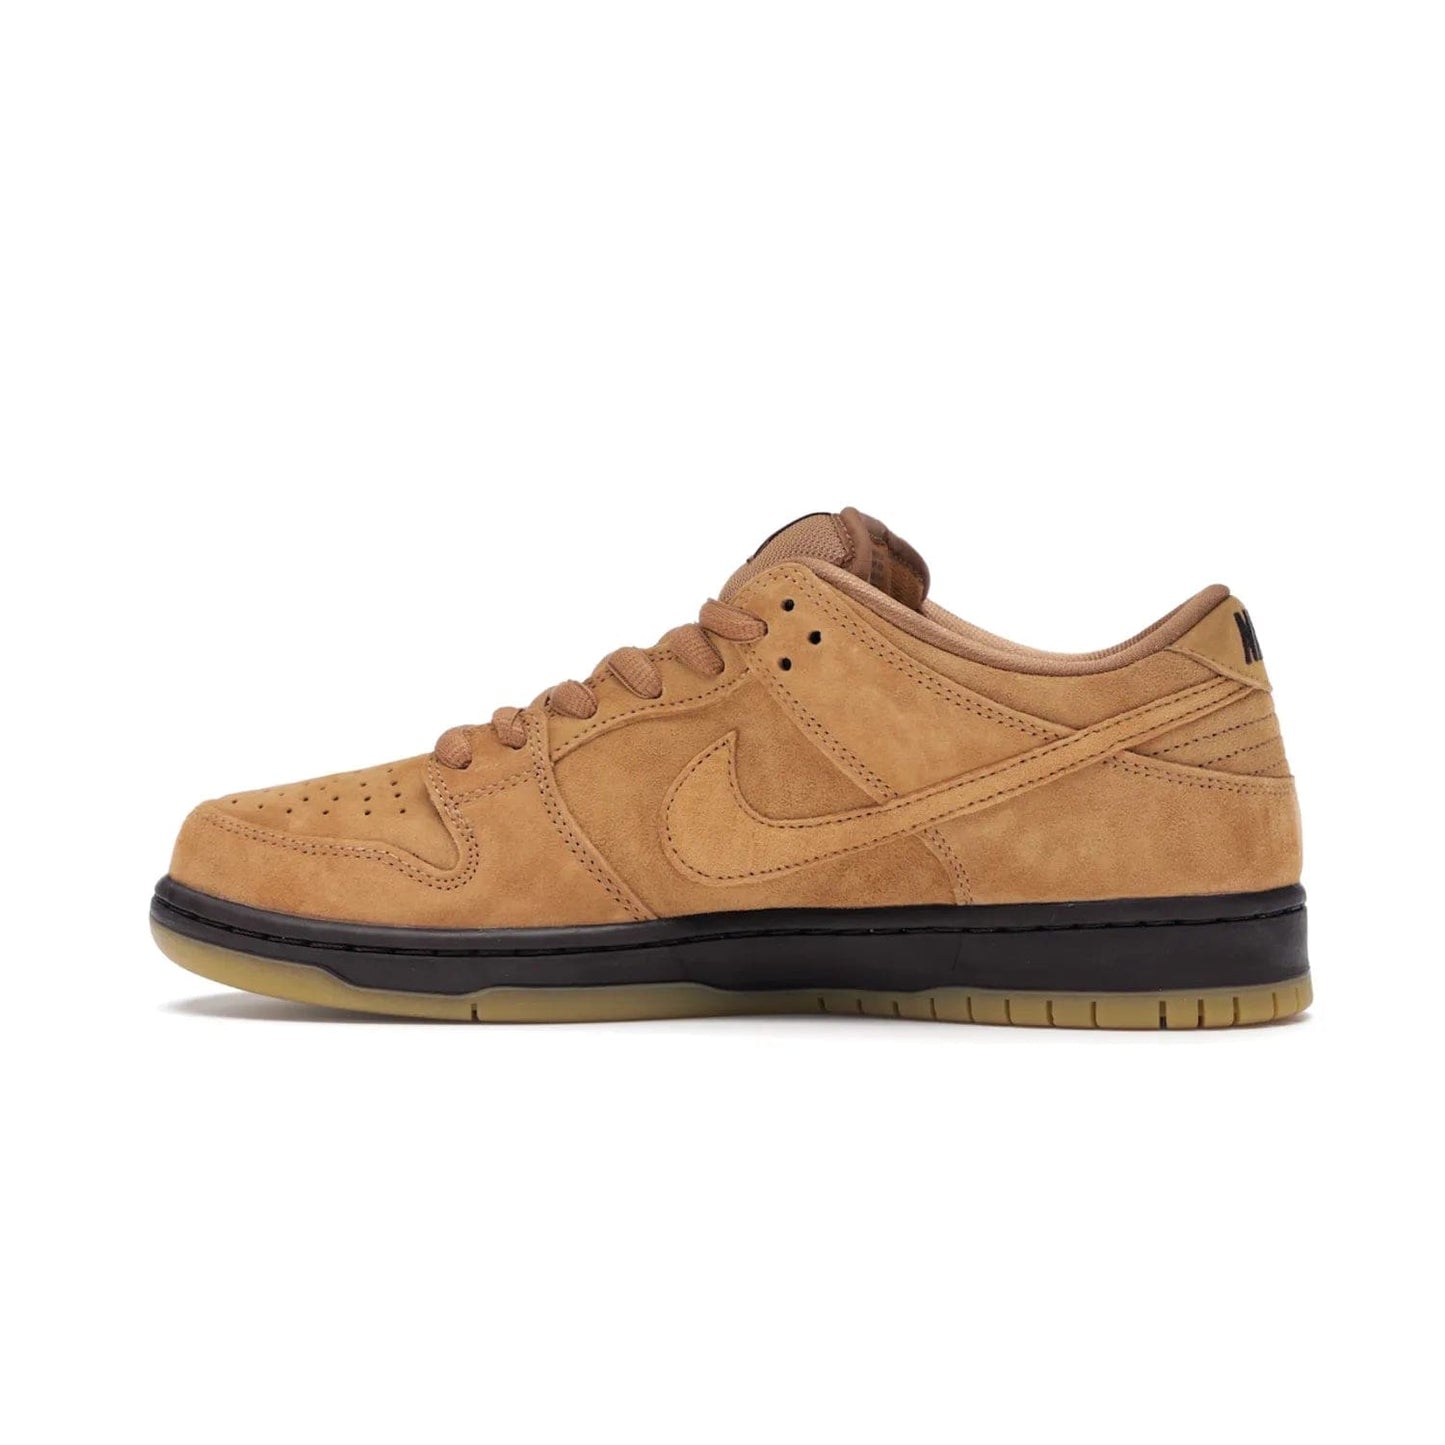 Nike SB Dunk Low Wheat (2021/2023) - Image 20 - Only at www.BallersClubKickz.com - The Nike SB Dunk Low Wheat (2021/2023)has a sleek silhouette and wheat suede upper. Tan tones for lining, mesh tongues, and laces. Iconic color palette midsole, perforated boxing toe. Brown branding on tongue and heel. Gum rubber outsole with partitioned pattern for traction. Eschewed in Feb 2021 for $110.